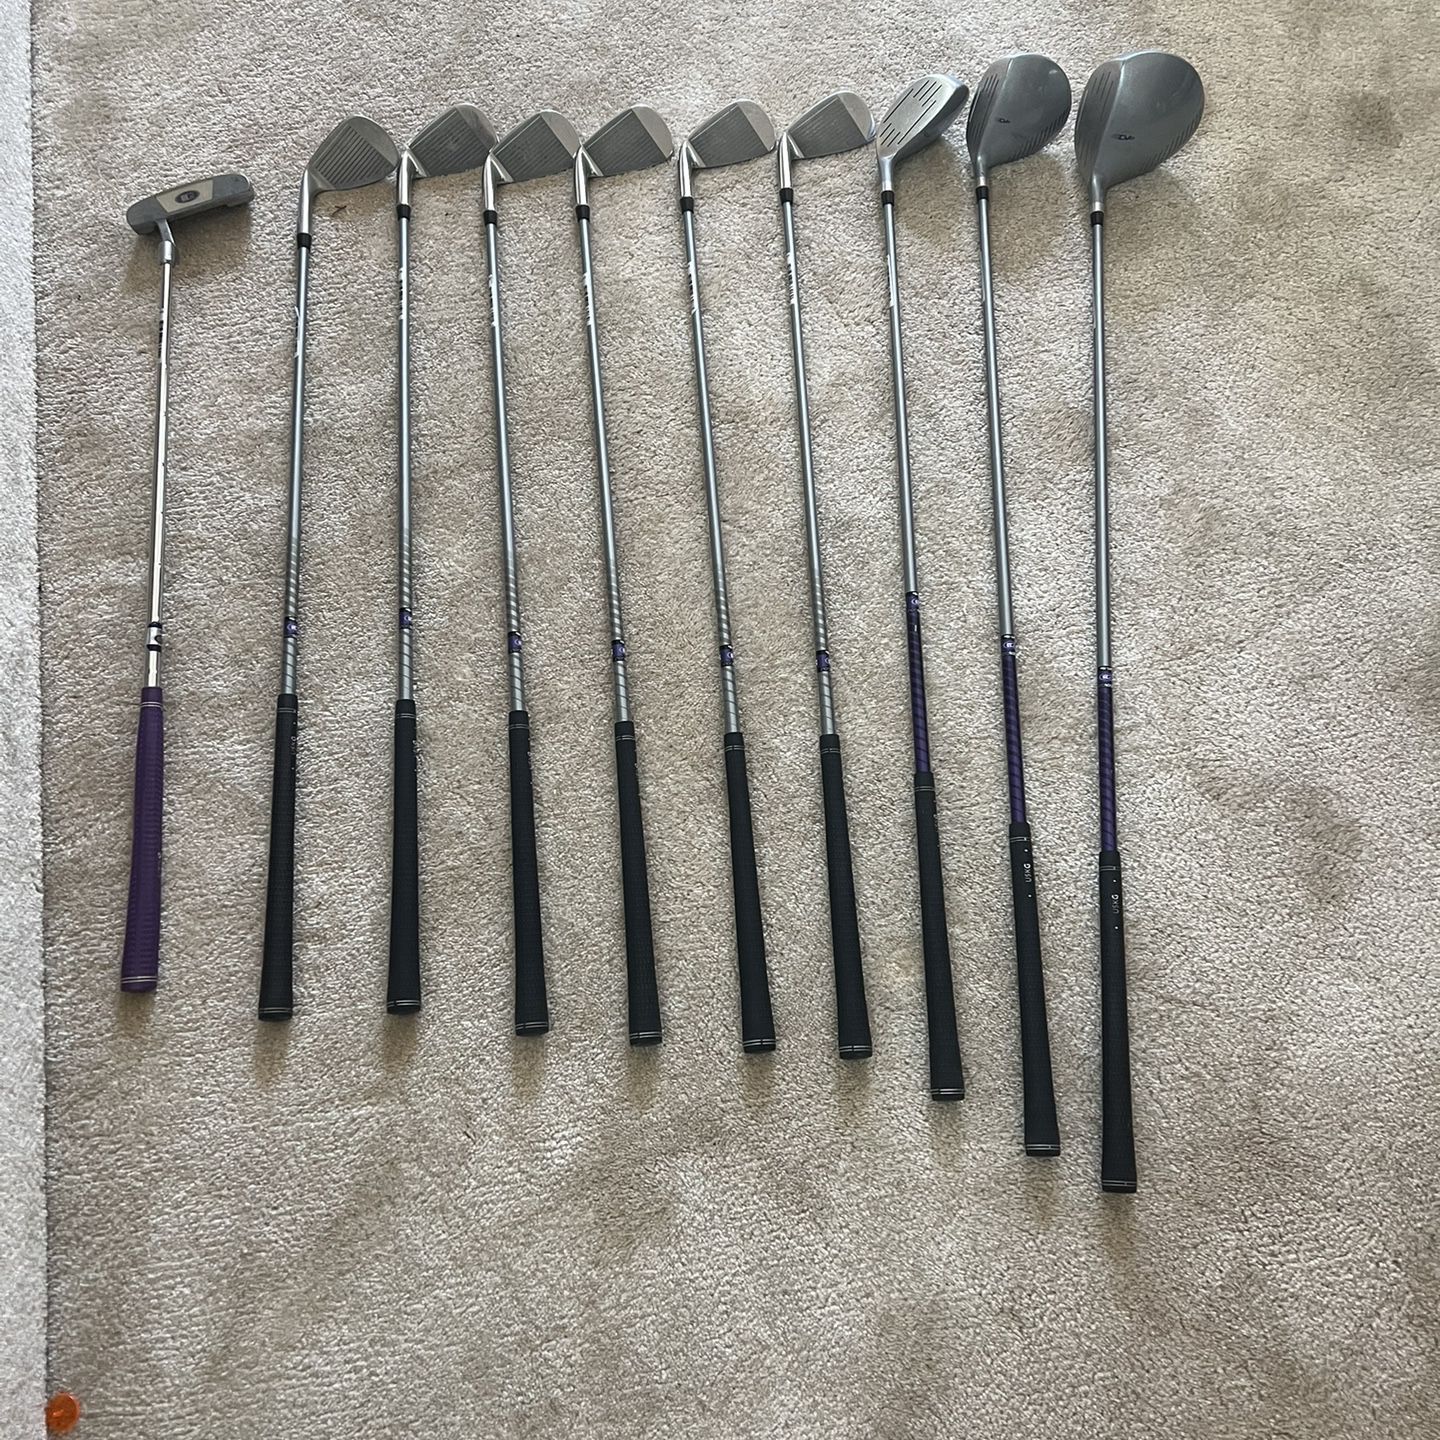 200 $ For Sale A Set Of USkids Golf Clubs And Bag